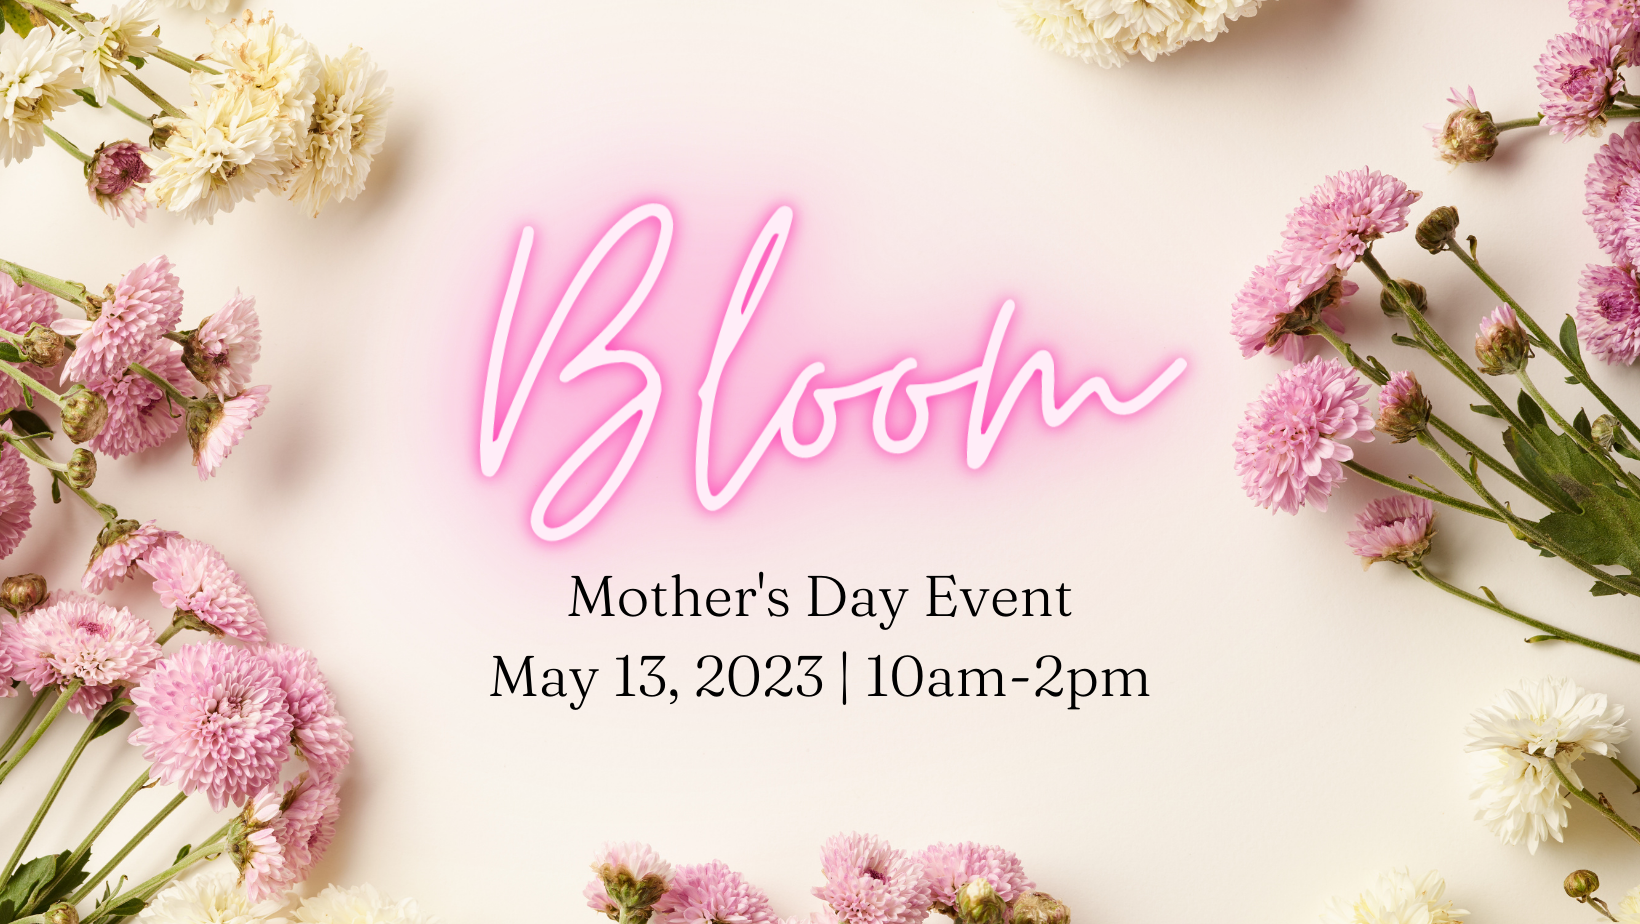 Mother’s Day Event: Bloom